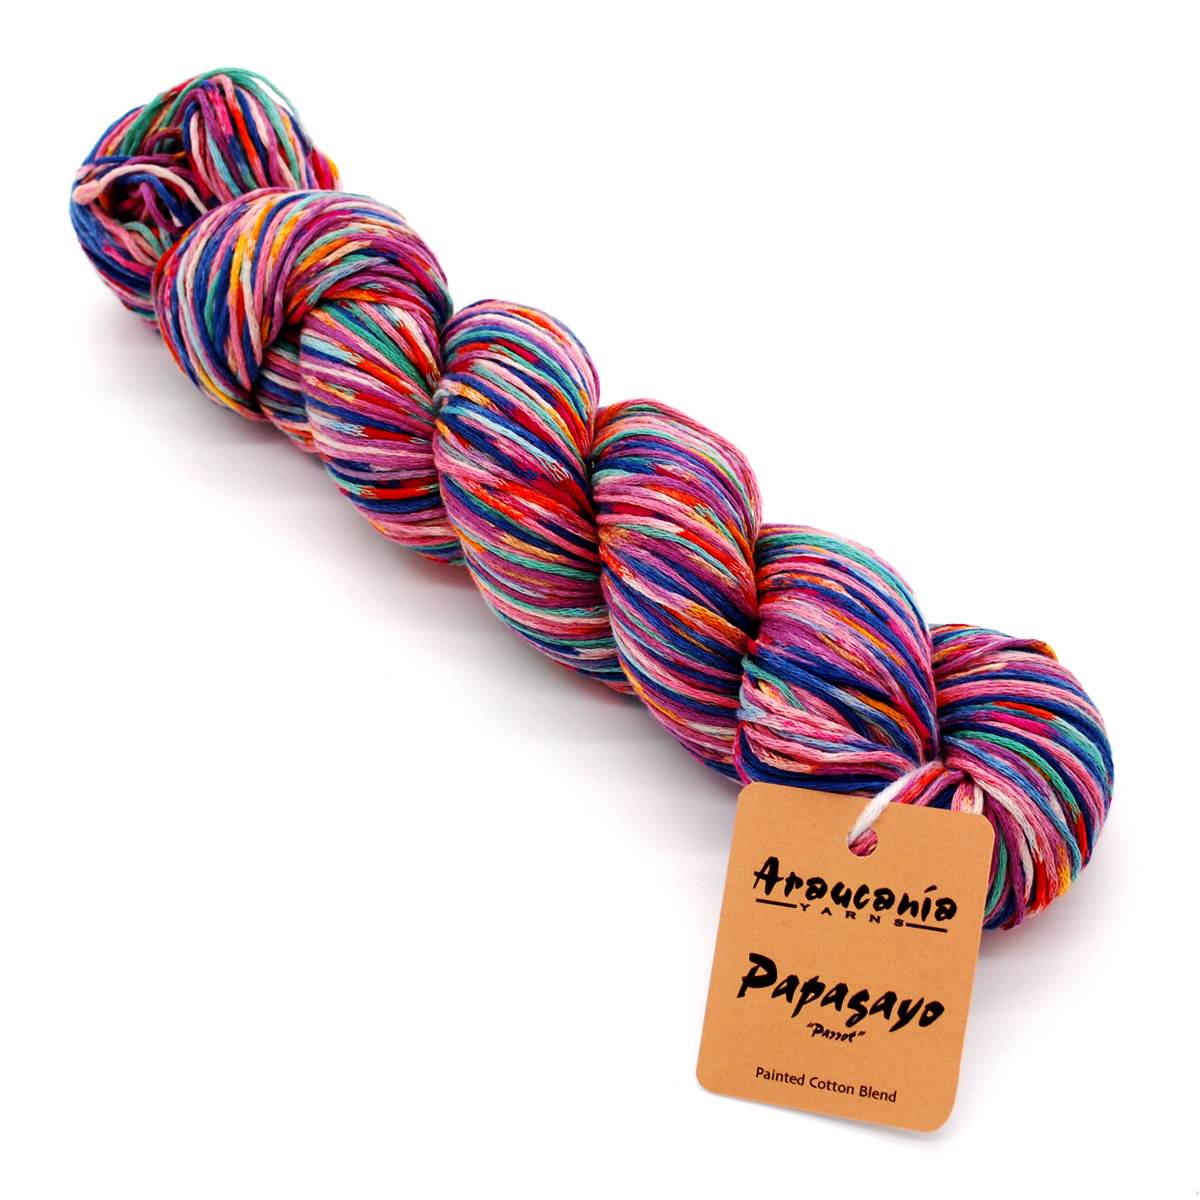 a skein of Papagayo